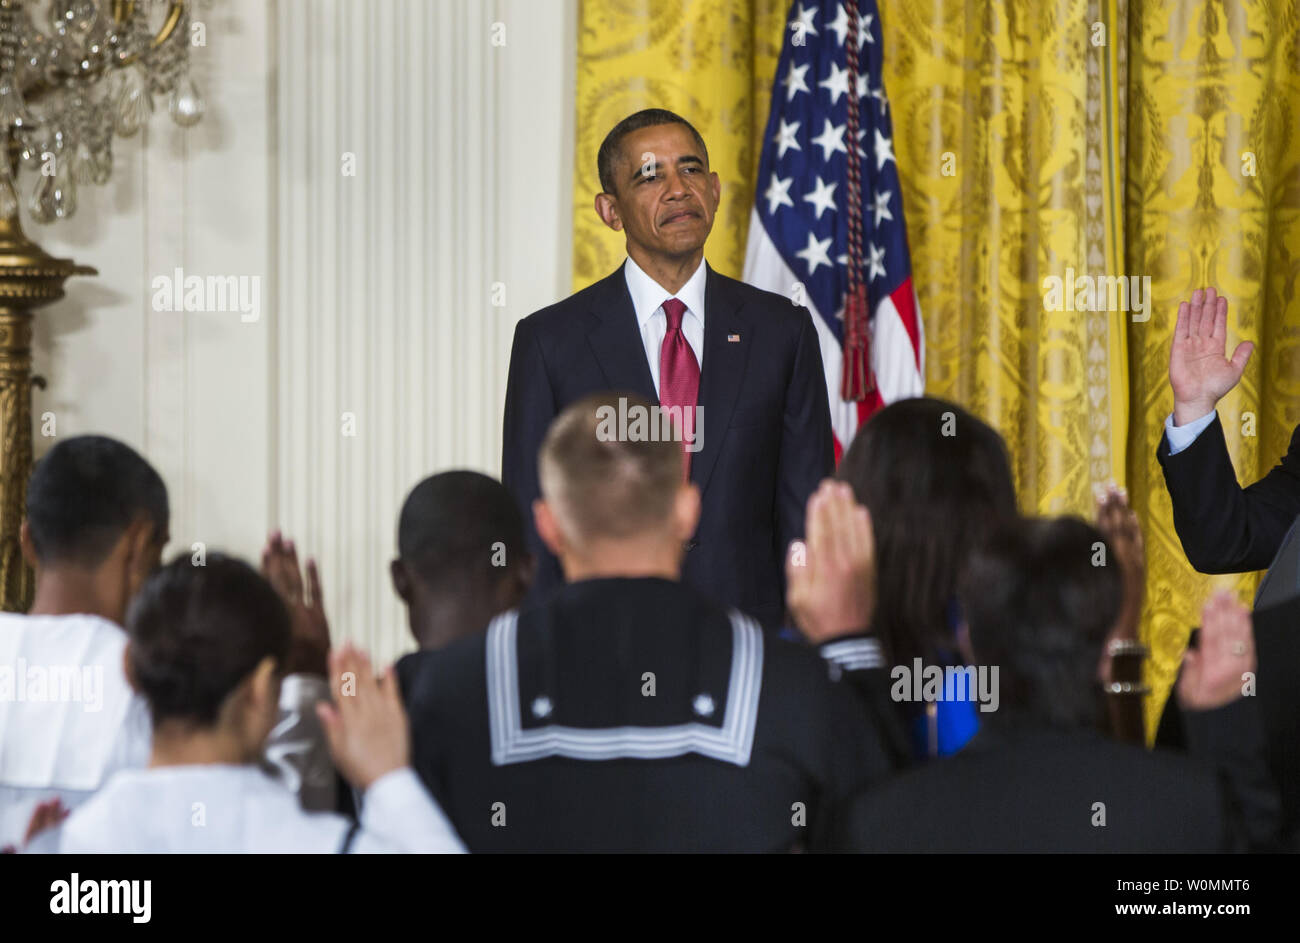 US President Barack Obama presides over a naturalization ceremony for active duty service members and civilians in the East Room of the White House in Washington, D.C. on July 4, 2014. The President plans to use executive actions to circumvent congress and move ahead with immigration reform.   UPI/Jim Lo Scalzo Stock Photo